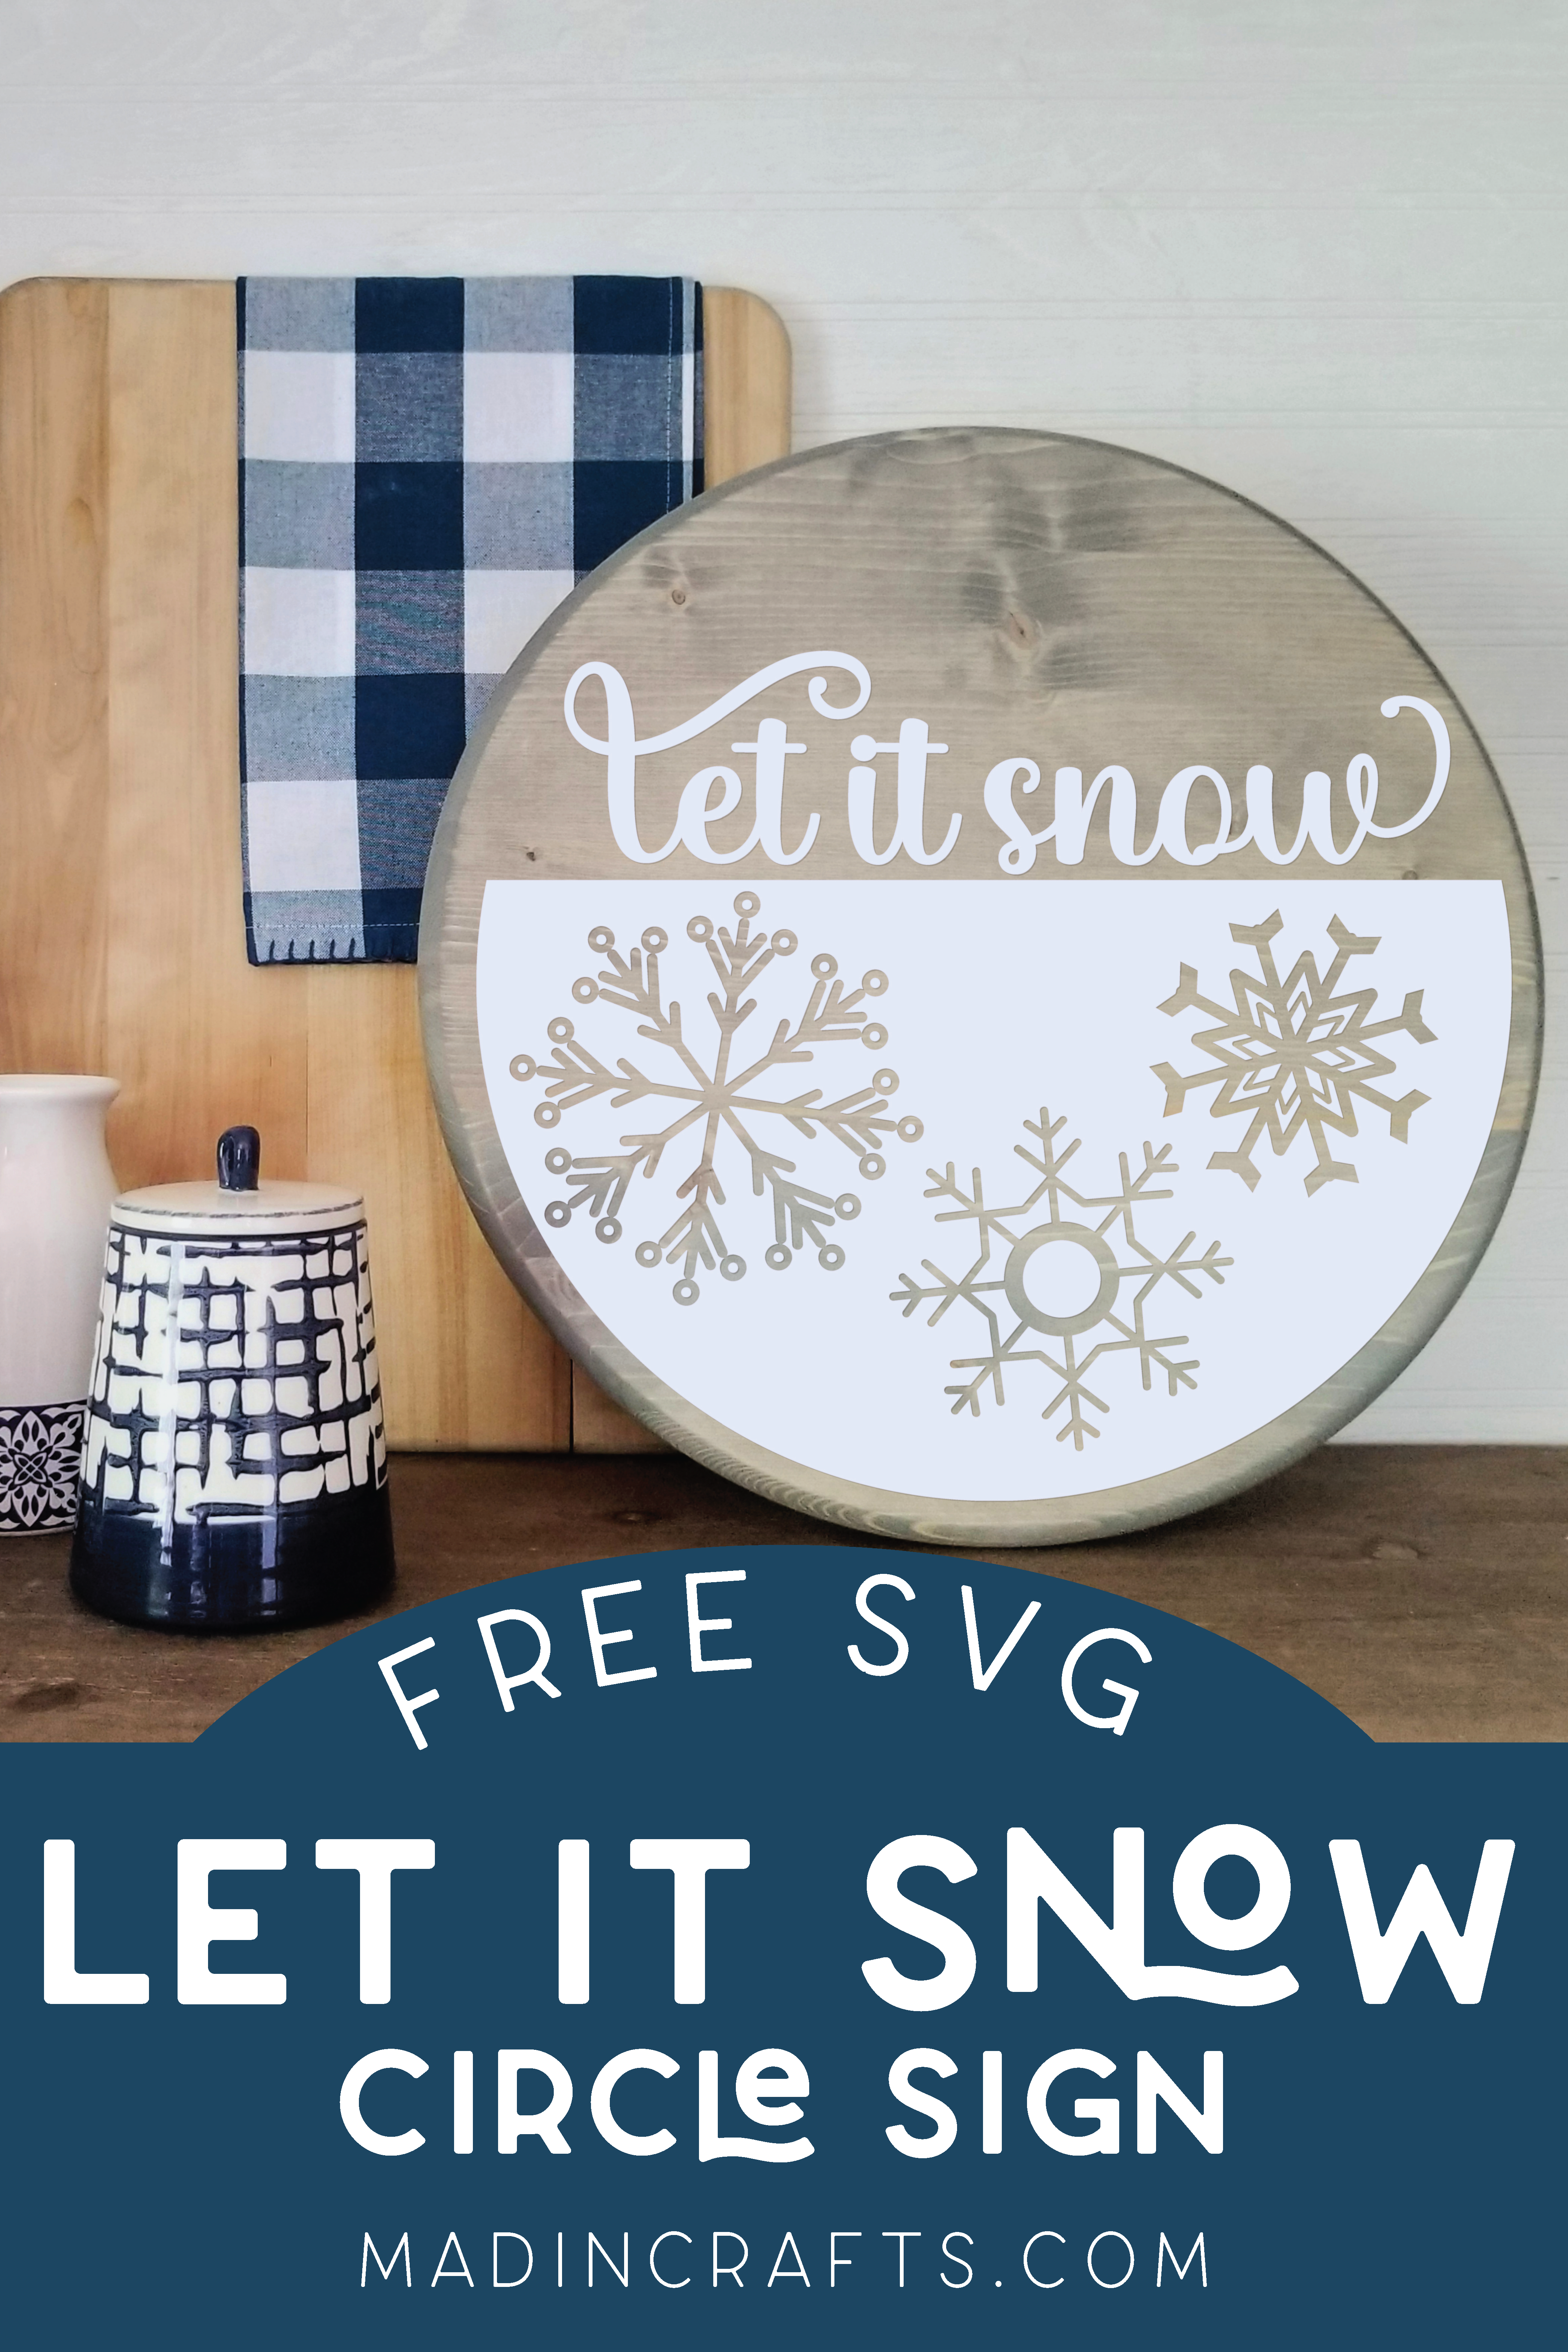 Let It Snow SVG applied to a wood circle displayed with vases and cutting boards